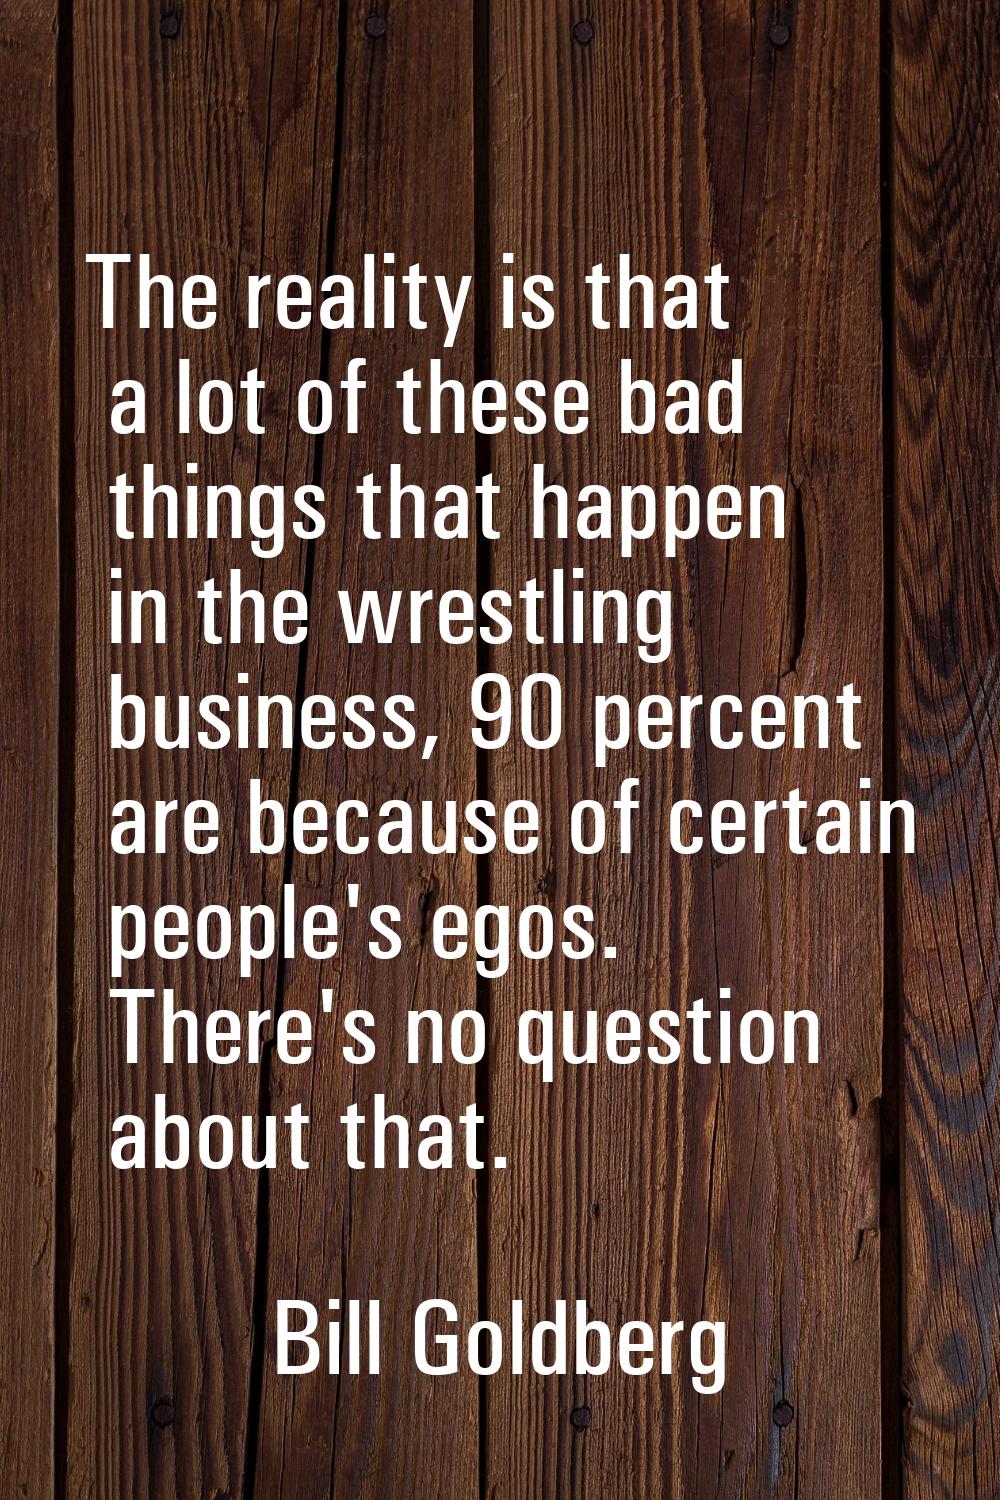 The reality is that a lot of these bad things that happen in the wrestling business, 90 percent are